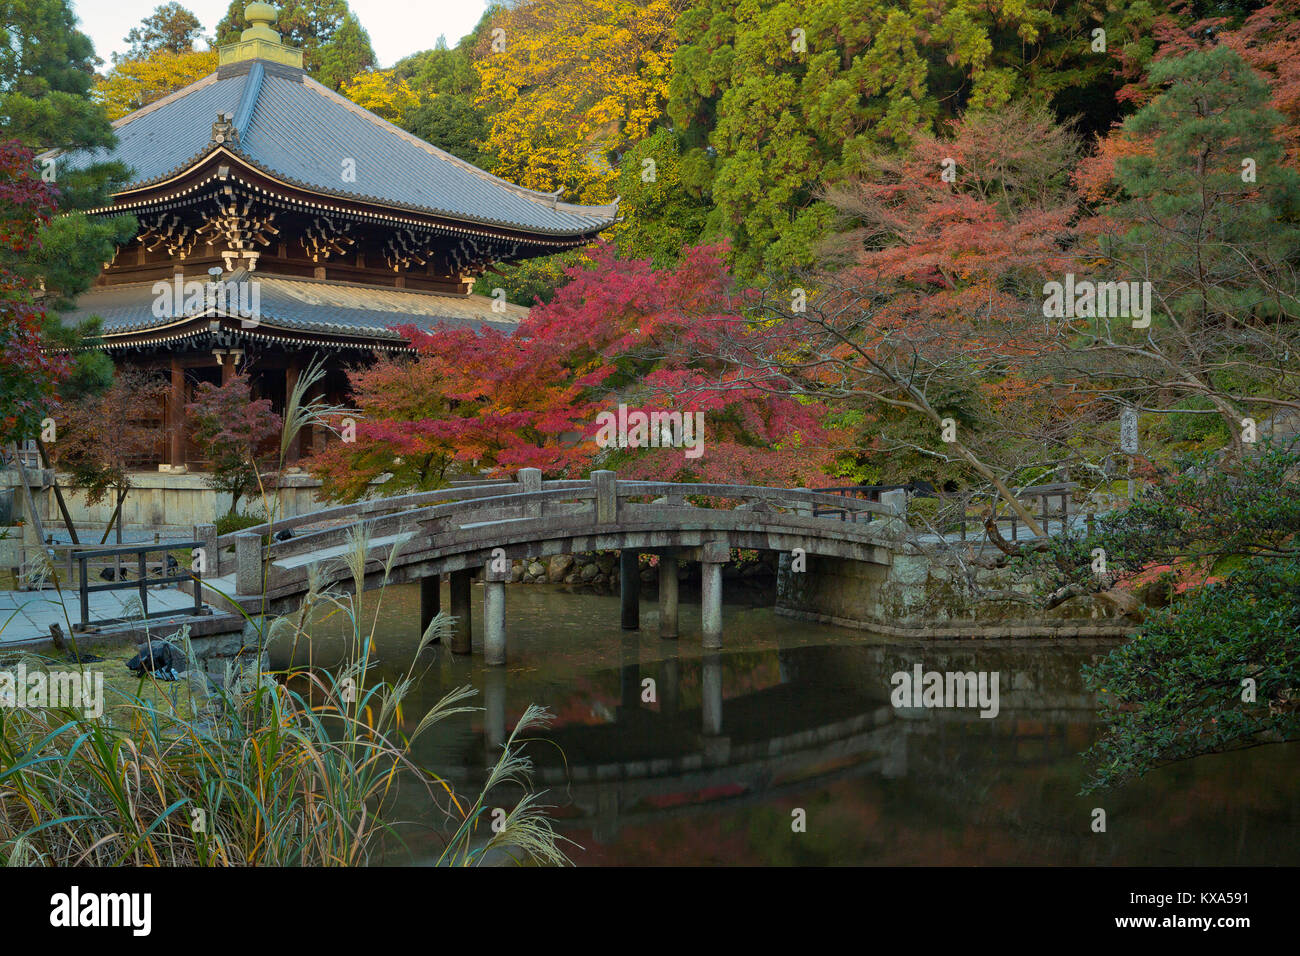 A bridge crosses a pond and a temple is in the background surrounded by fall color in Kyoto, Japan. Stock Photo